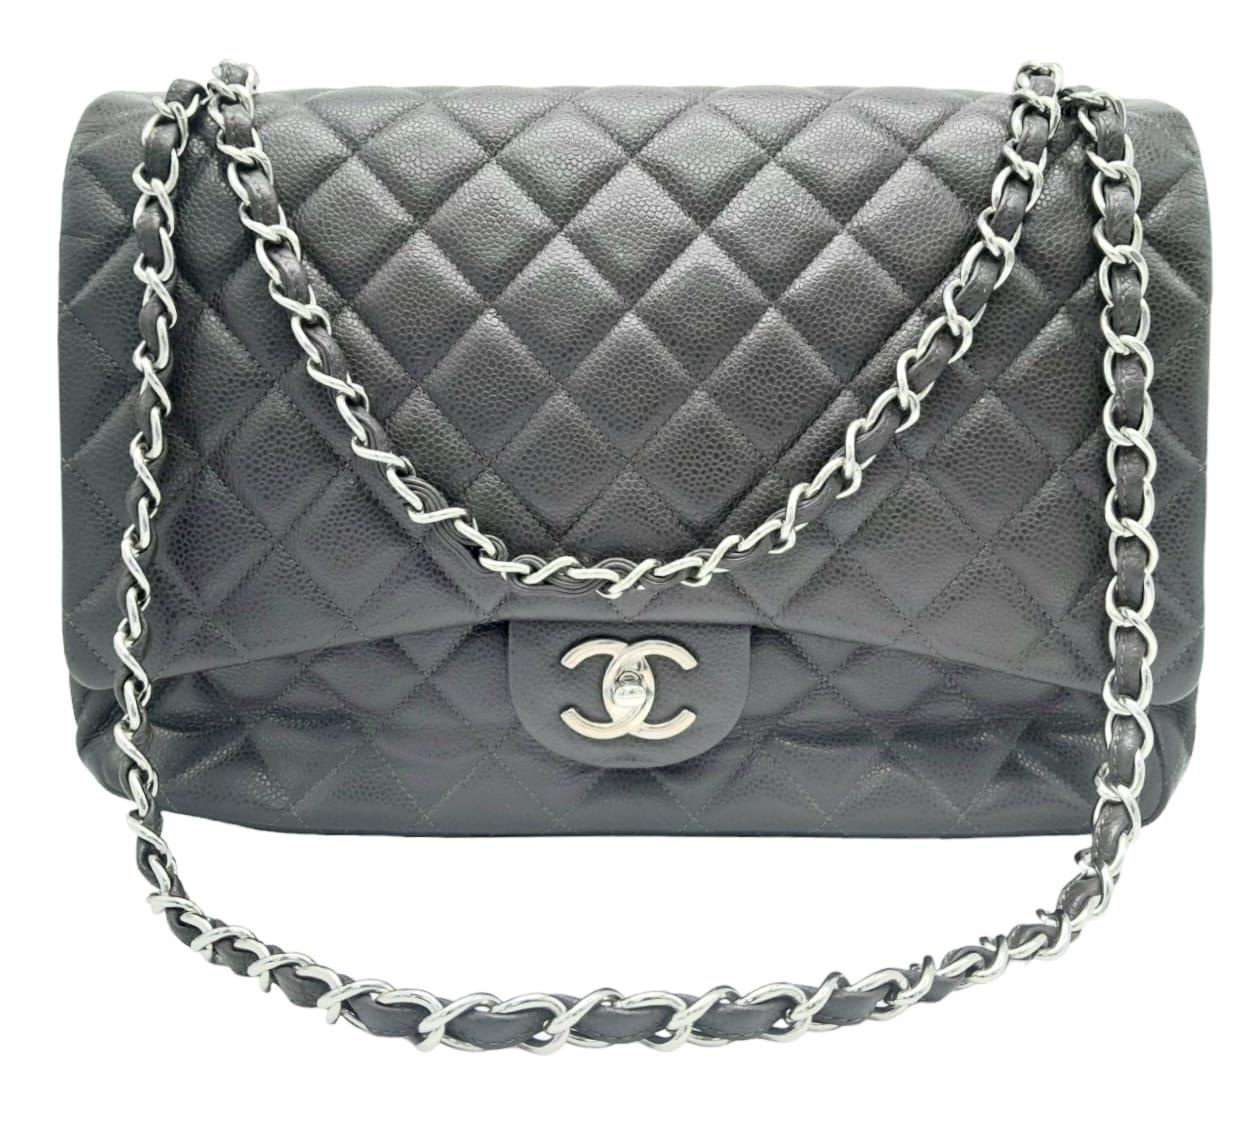 A Chanel Jumbo Double Flap Maxi Bag. Dark grey quilted caviar leather exterior with a large slip